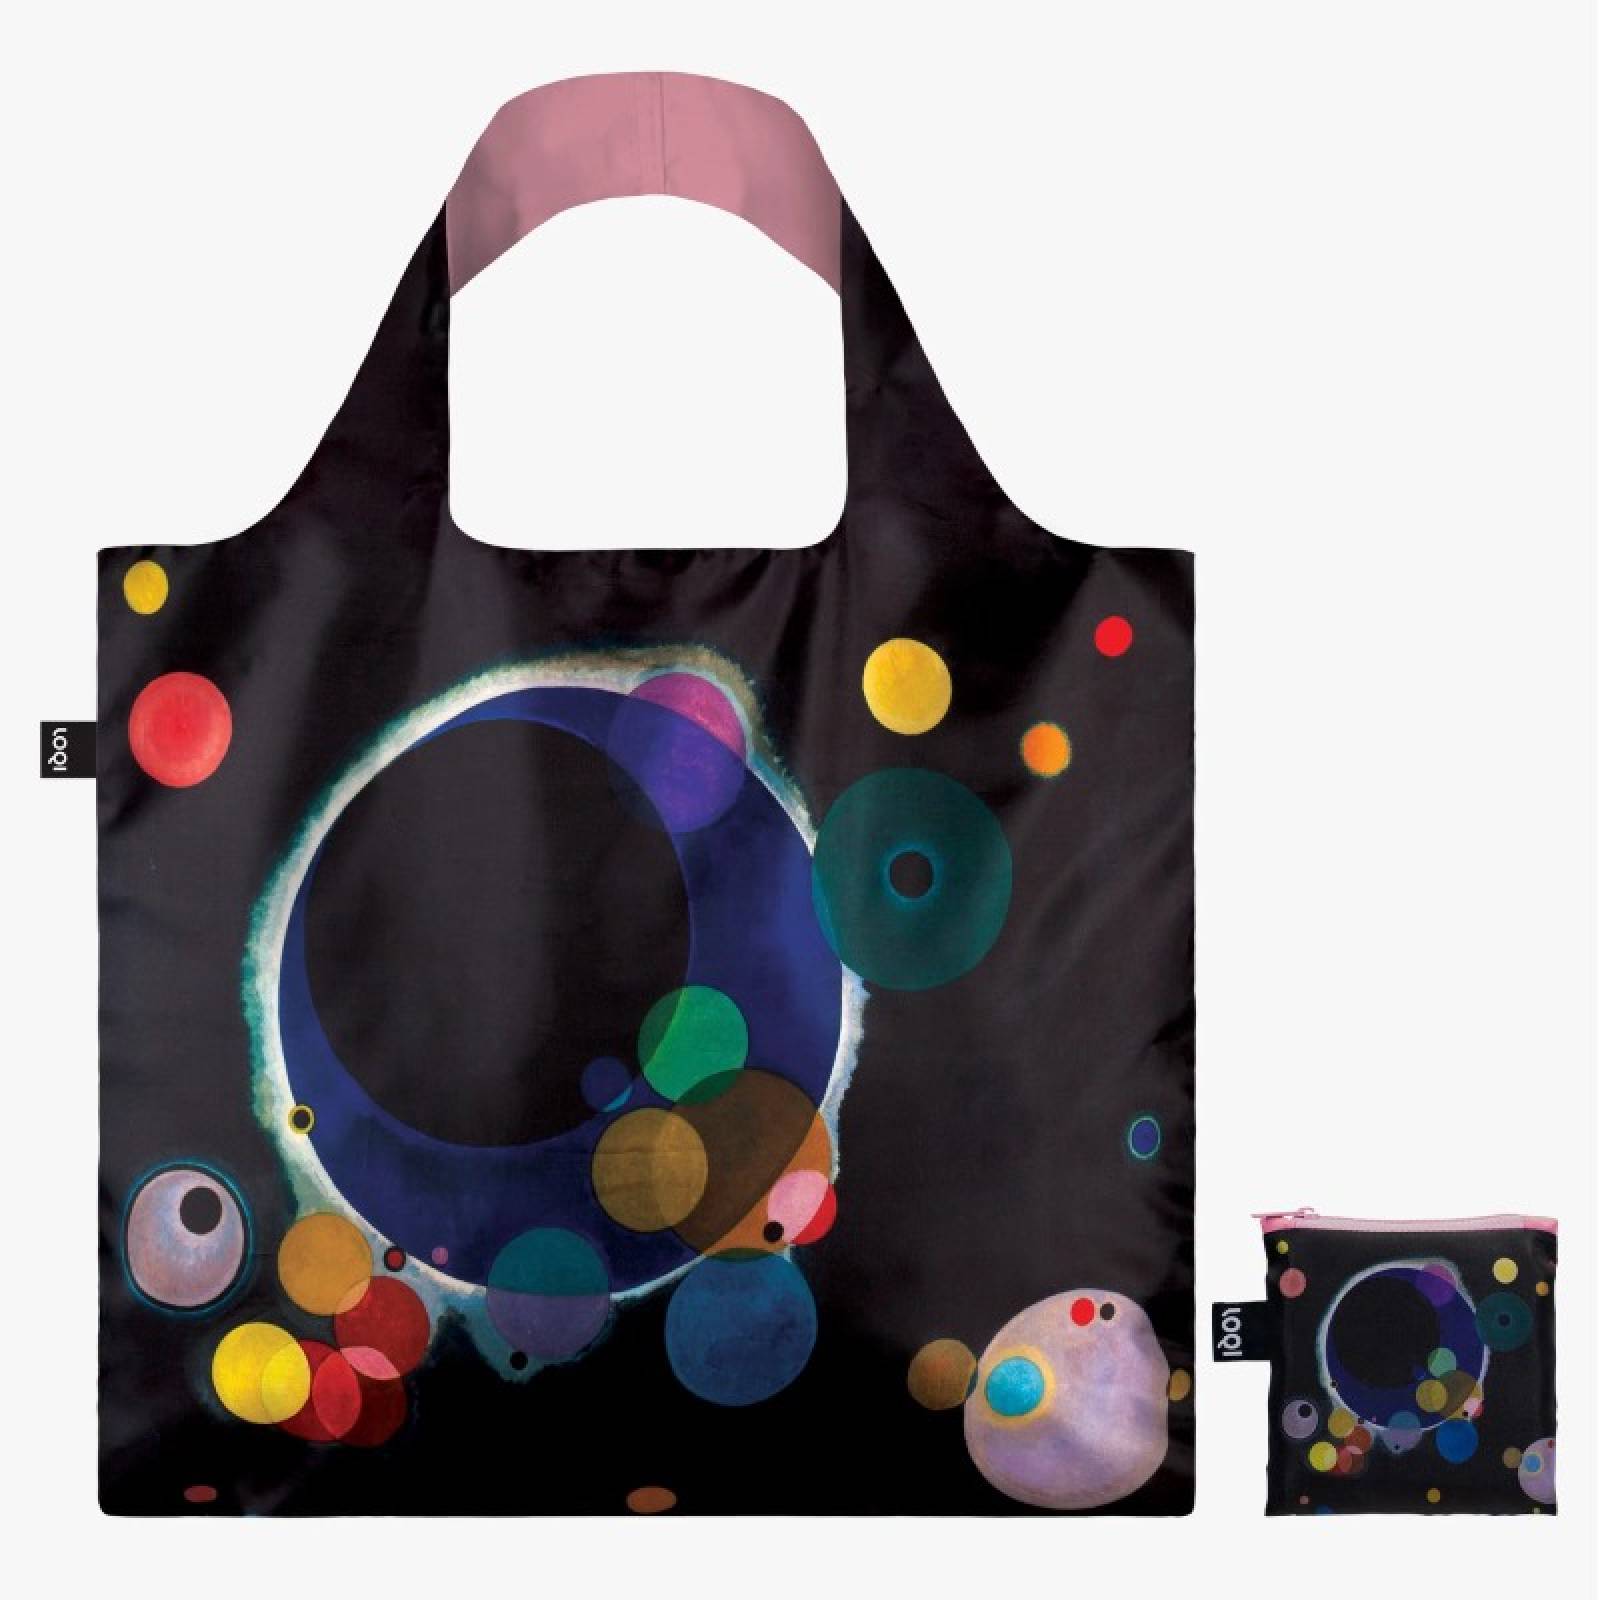 Kandinsky Several Circles - Eco Tote Bag With Pouch thumbnails